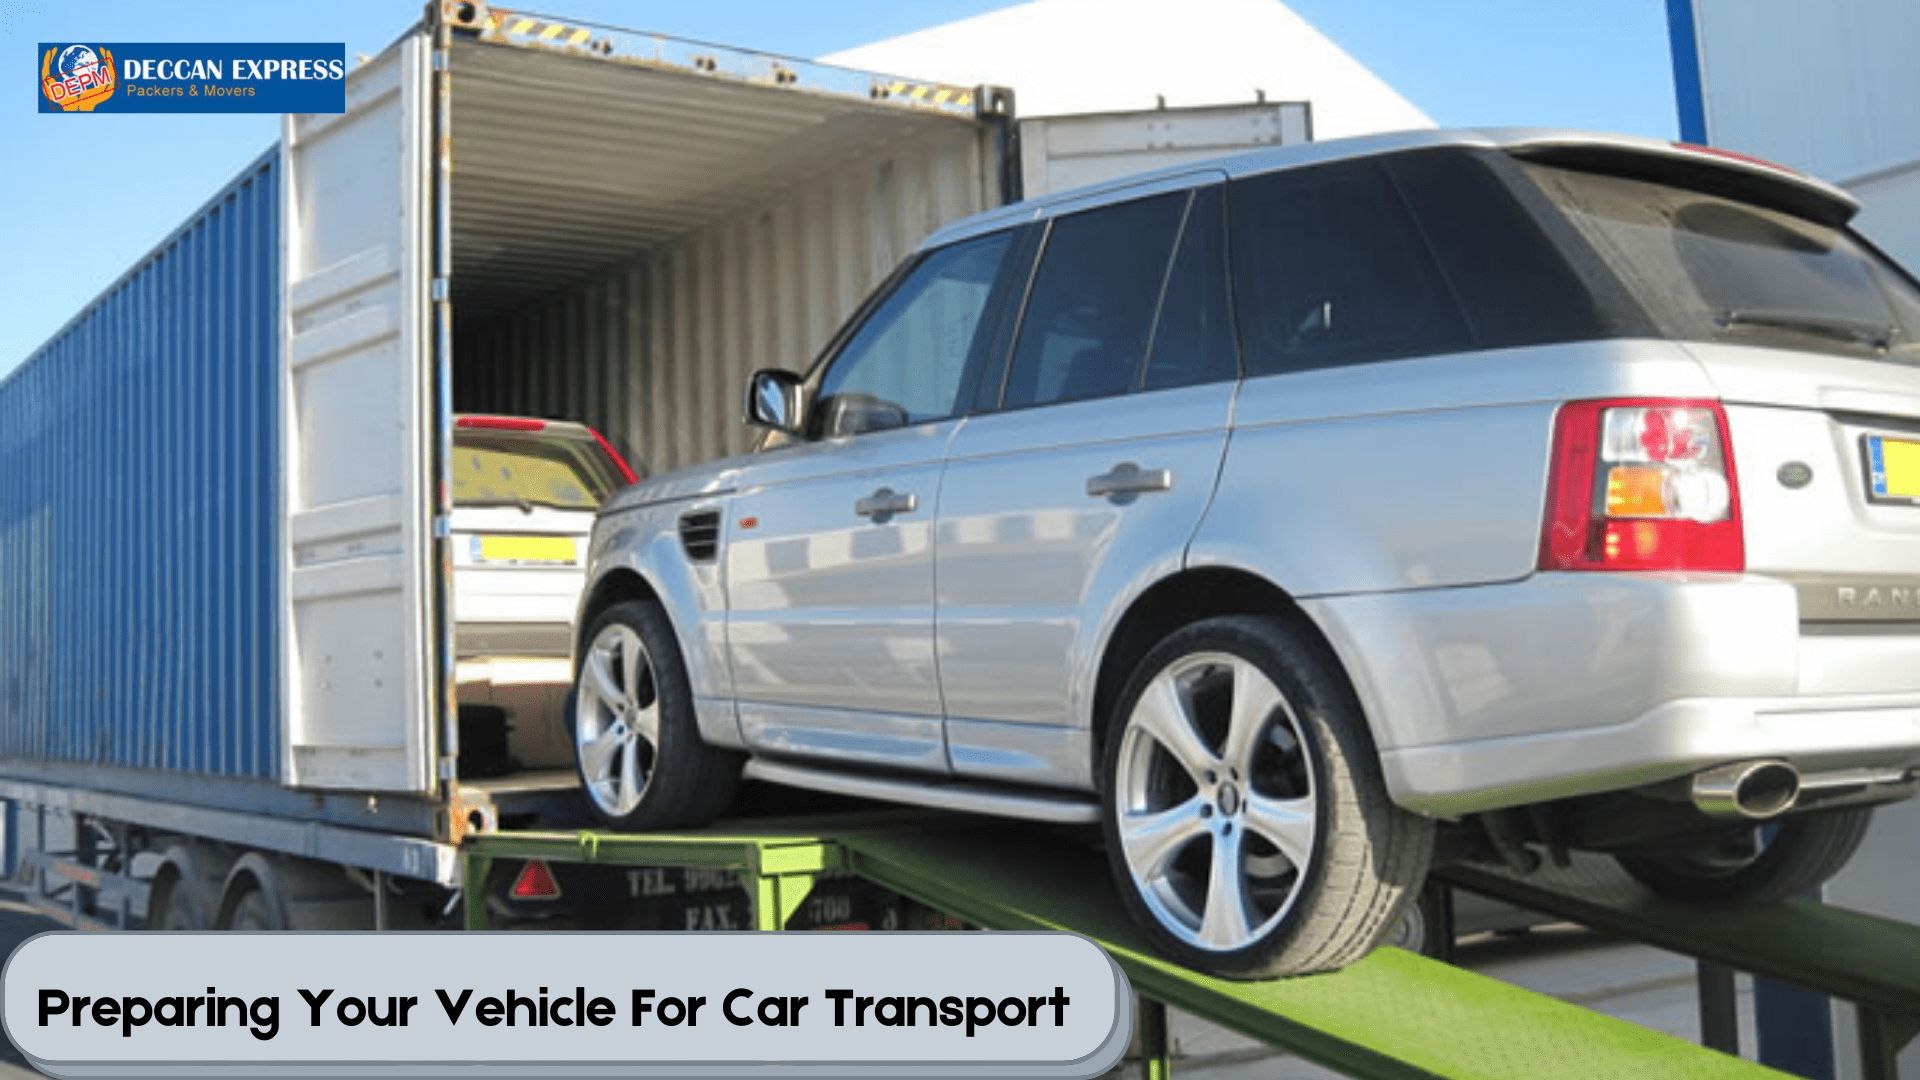 Preparing Your Vehicle For Car Transport